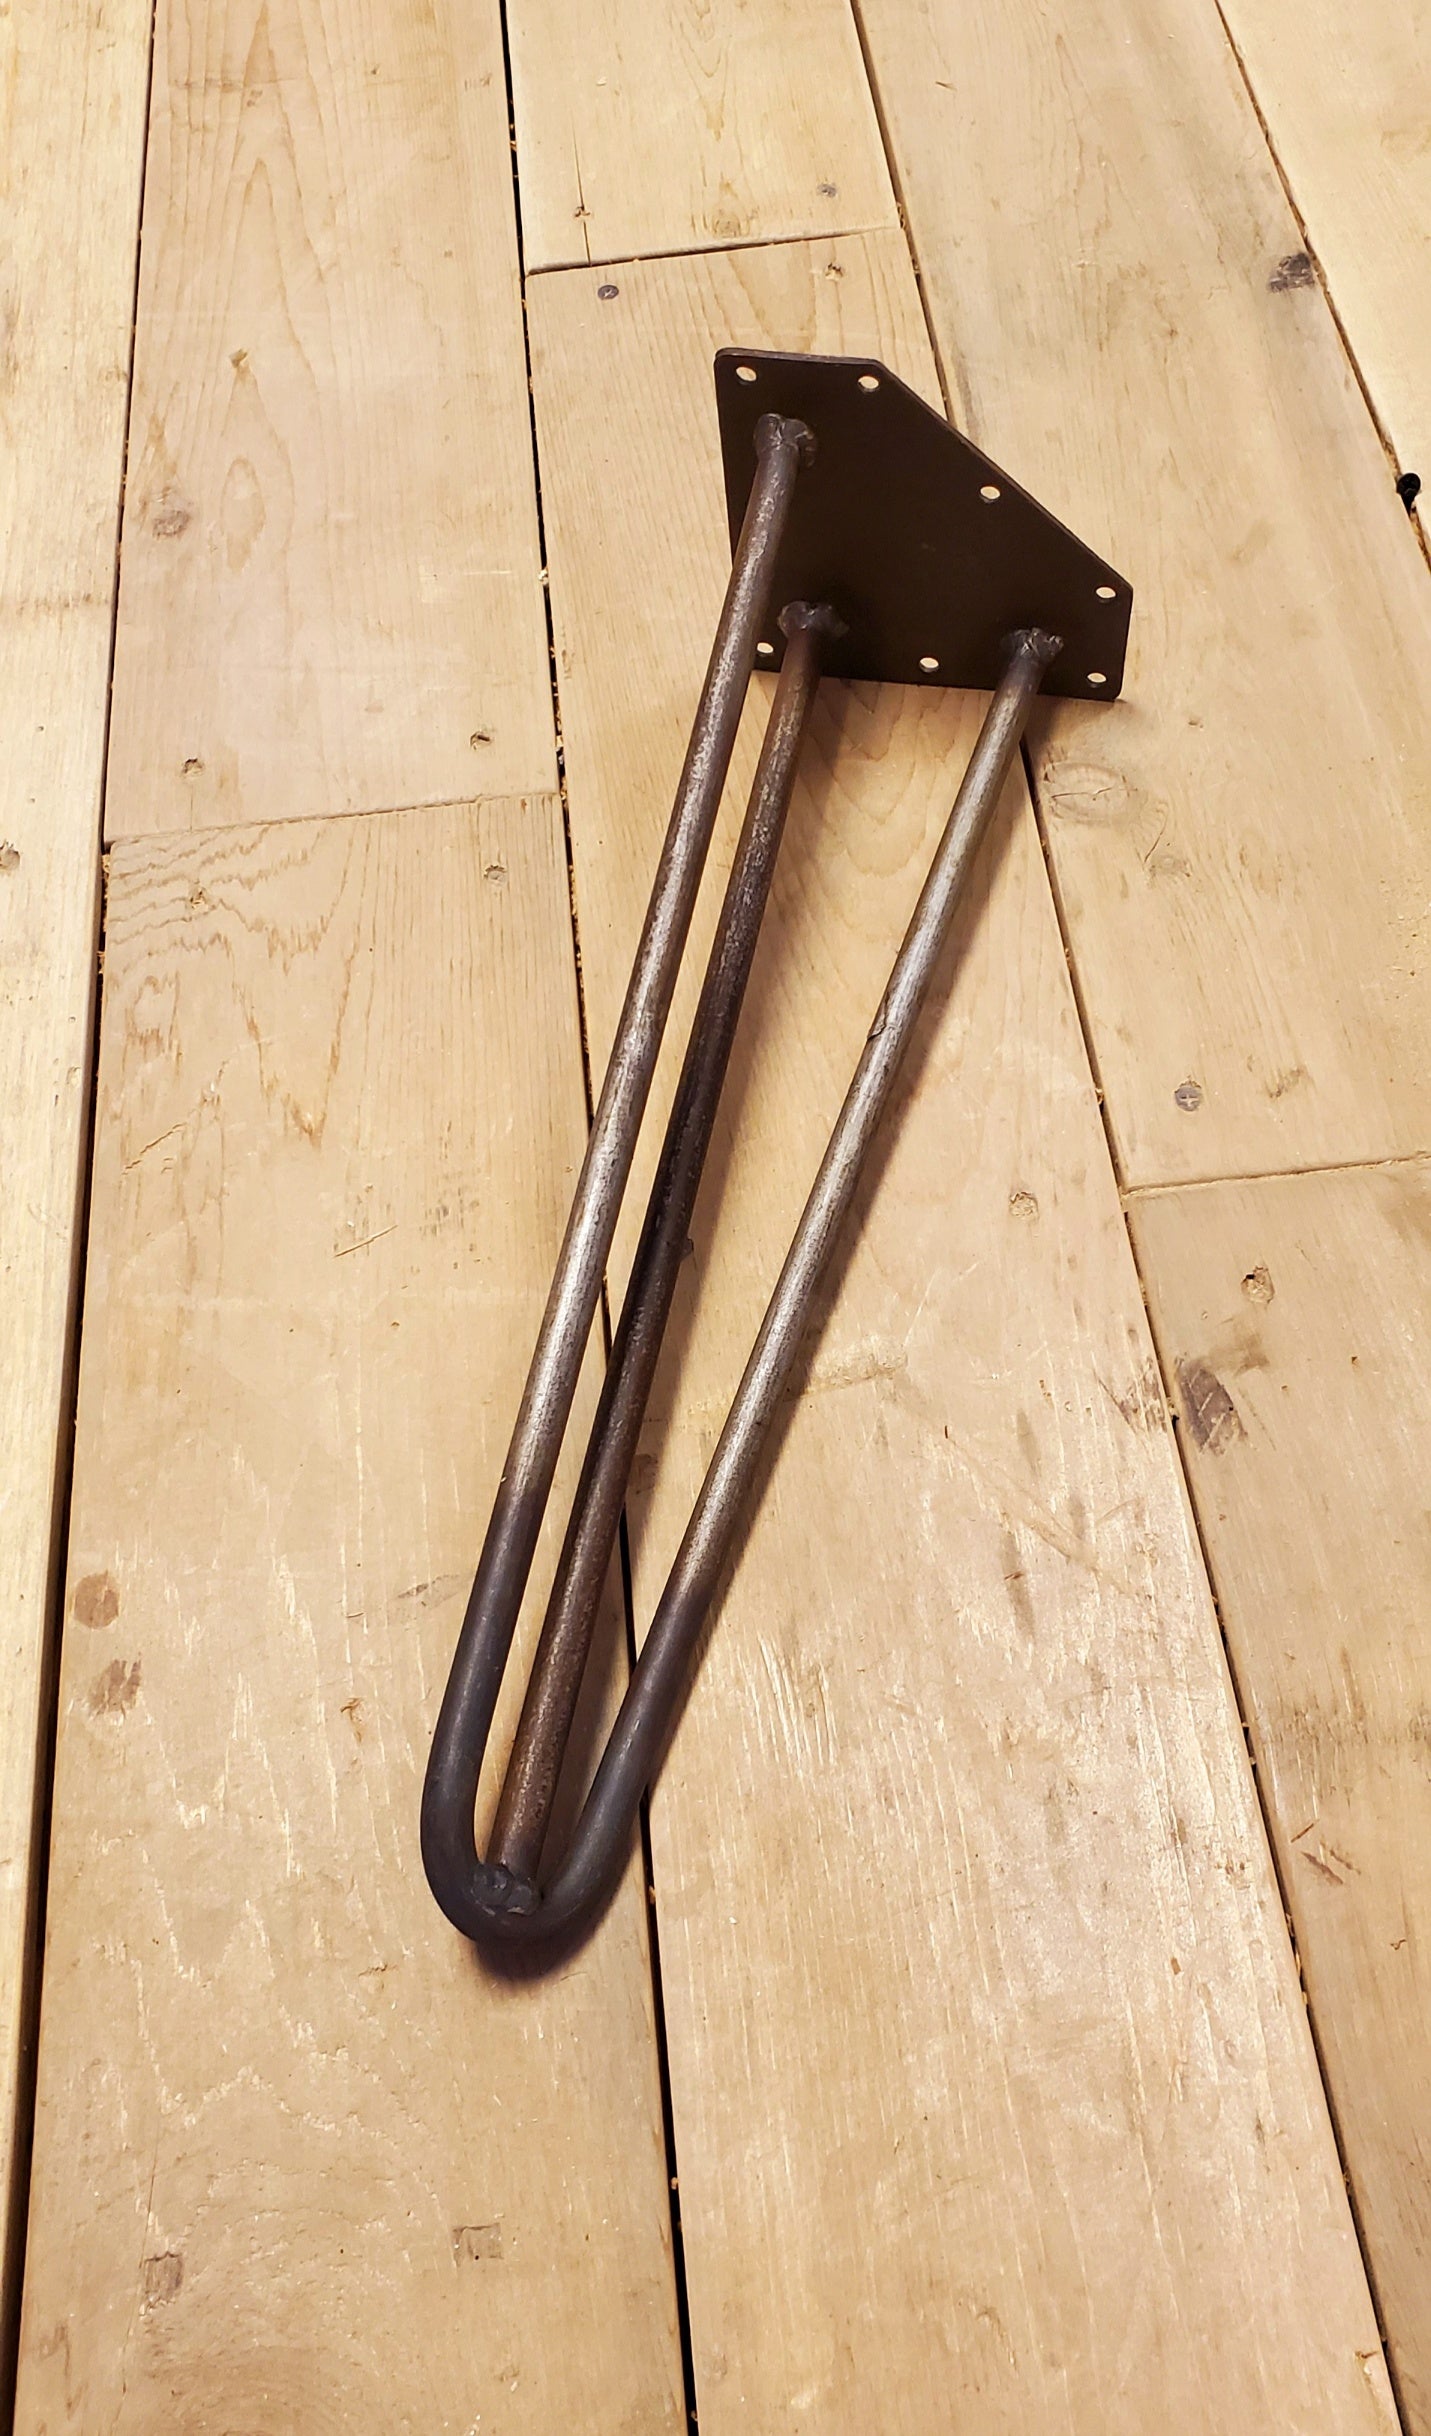 Hairpin Leg 16"  Very Heavy Duty Antique Iron 3 prong - Spearhead Collection - Hairpin Legs - Hairpin Legs, Hardware, Home Decor, Industrial, Millwork Hardware